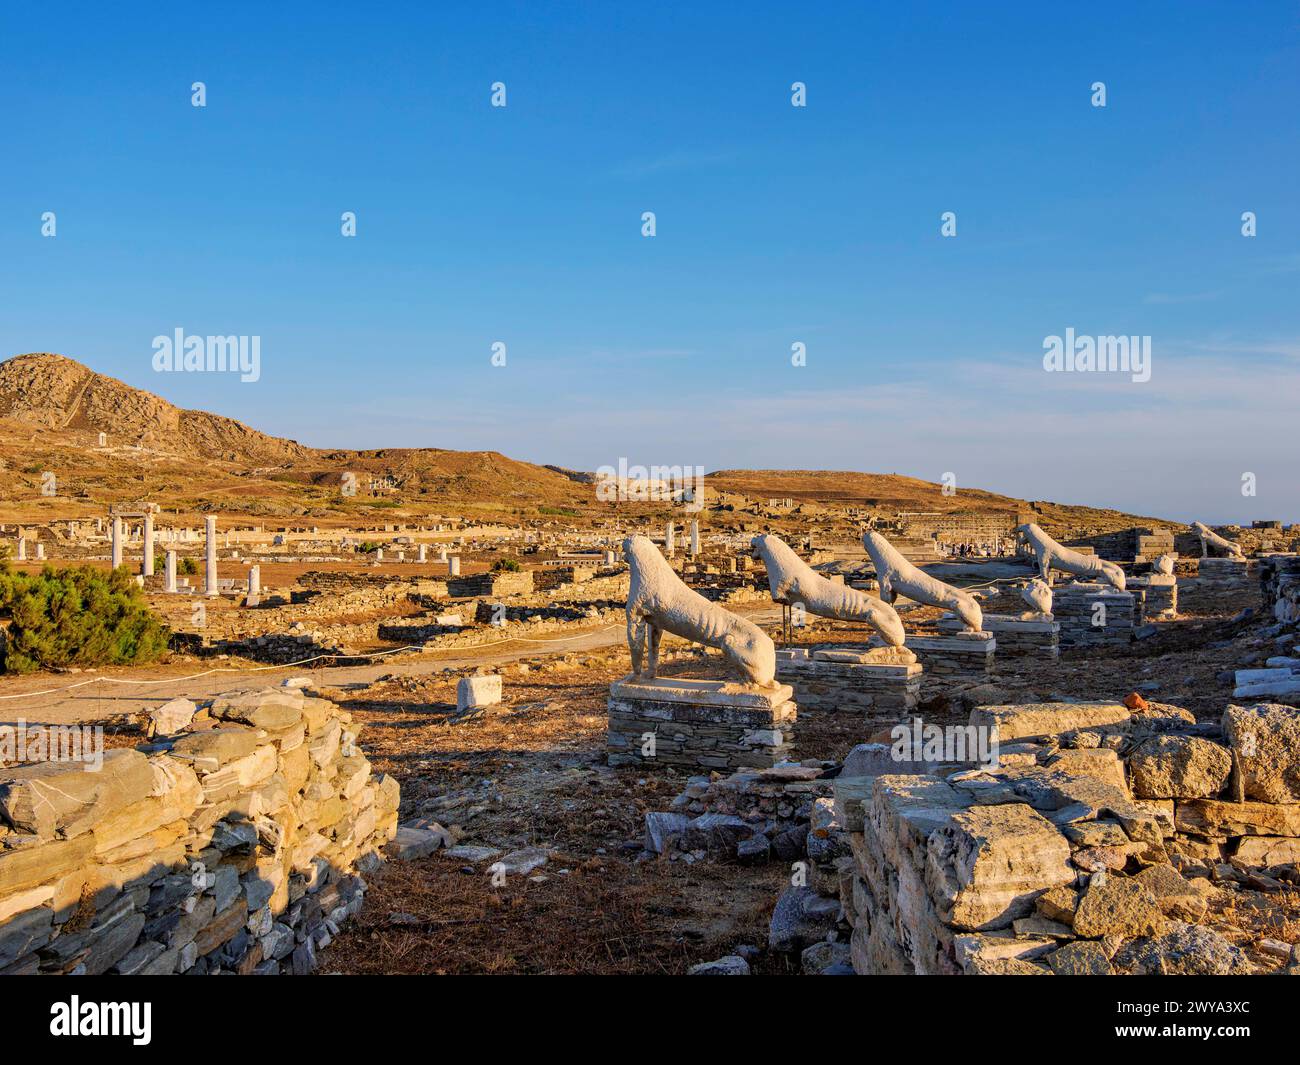 The Terrace of the Lions at sunset, Delos Archaeological Site, UNESCO World Heritage Site, Delos Island, Cyclades, Greek Islands, Greece, Europe Copyr Stock Photo